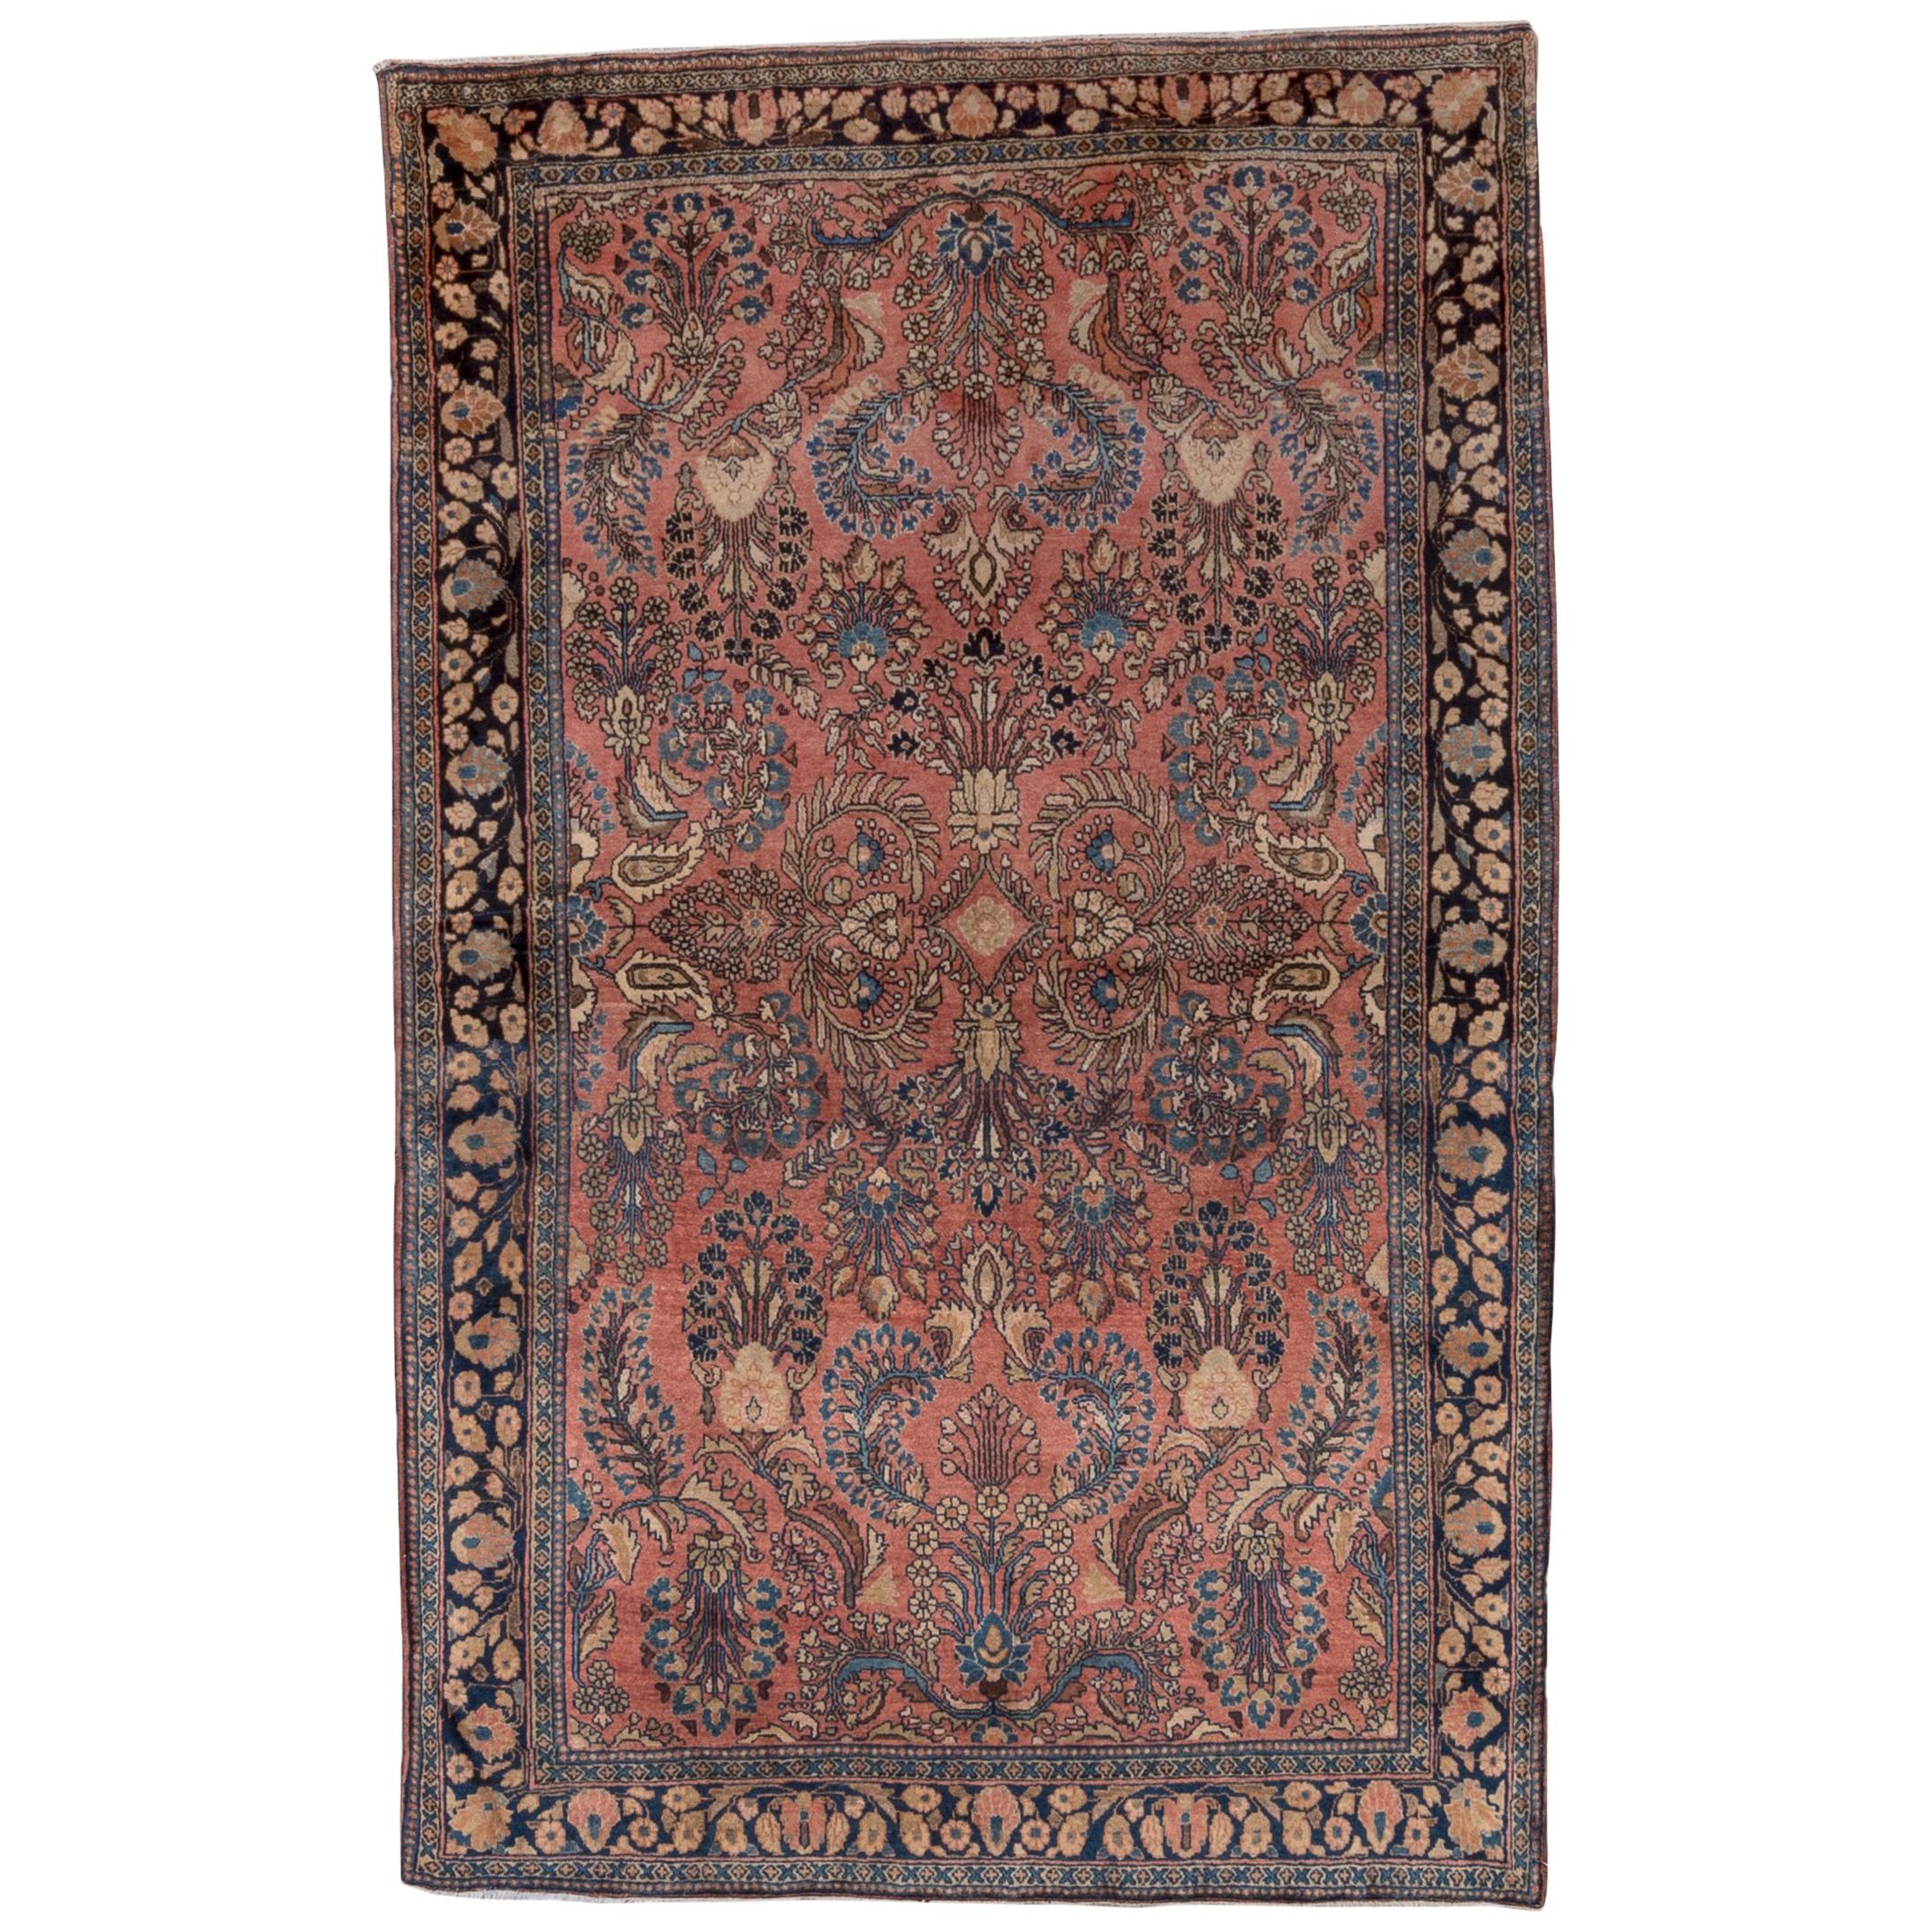 1930s Antique Persian Sarouk Rug with a Salmon Field, American Sarouk Style